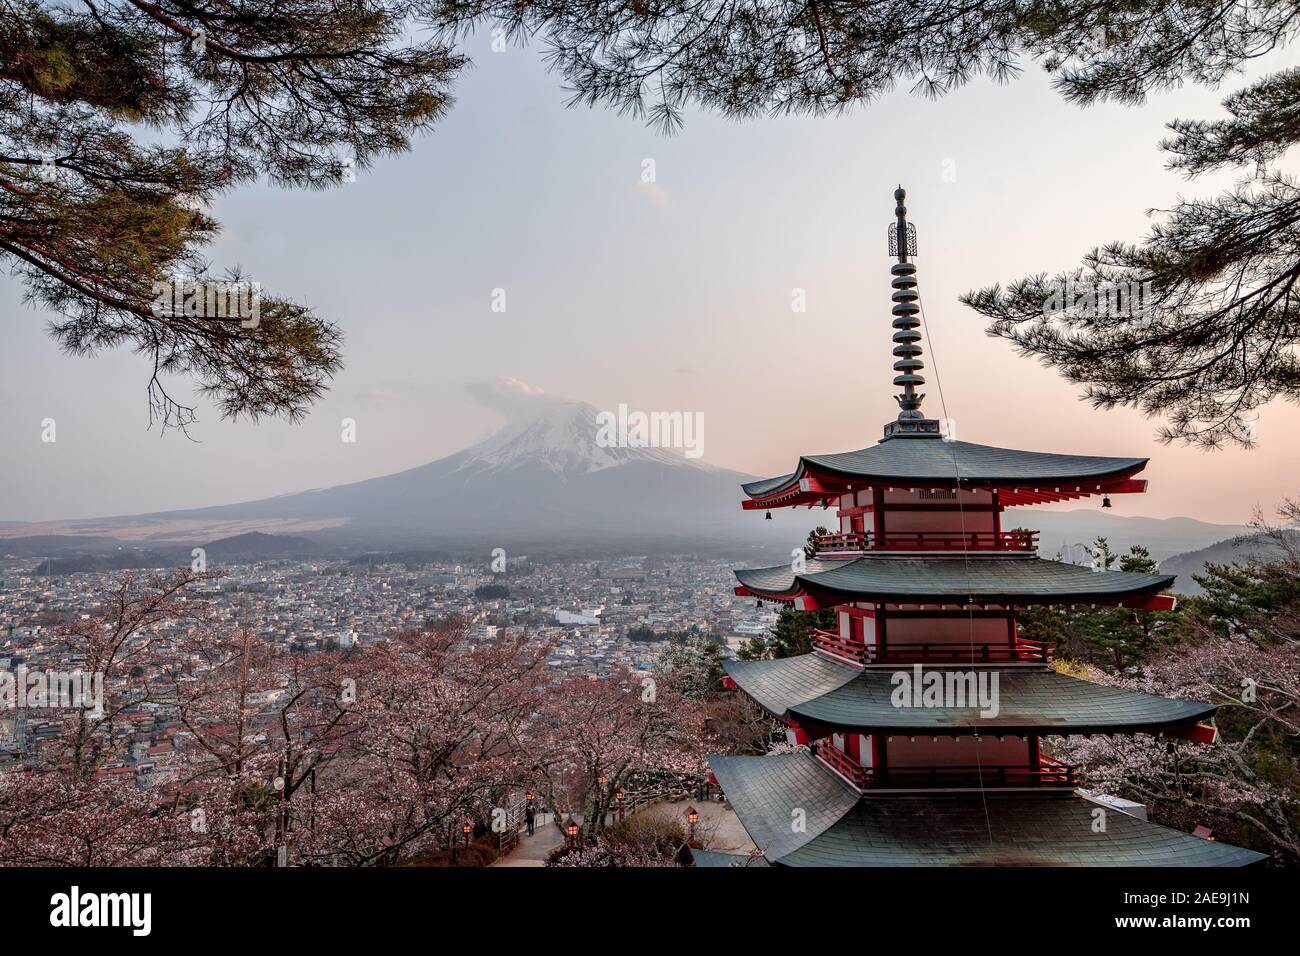 The mount Fuji with some cherry blossoms Stock Photo